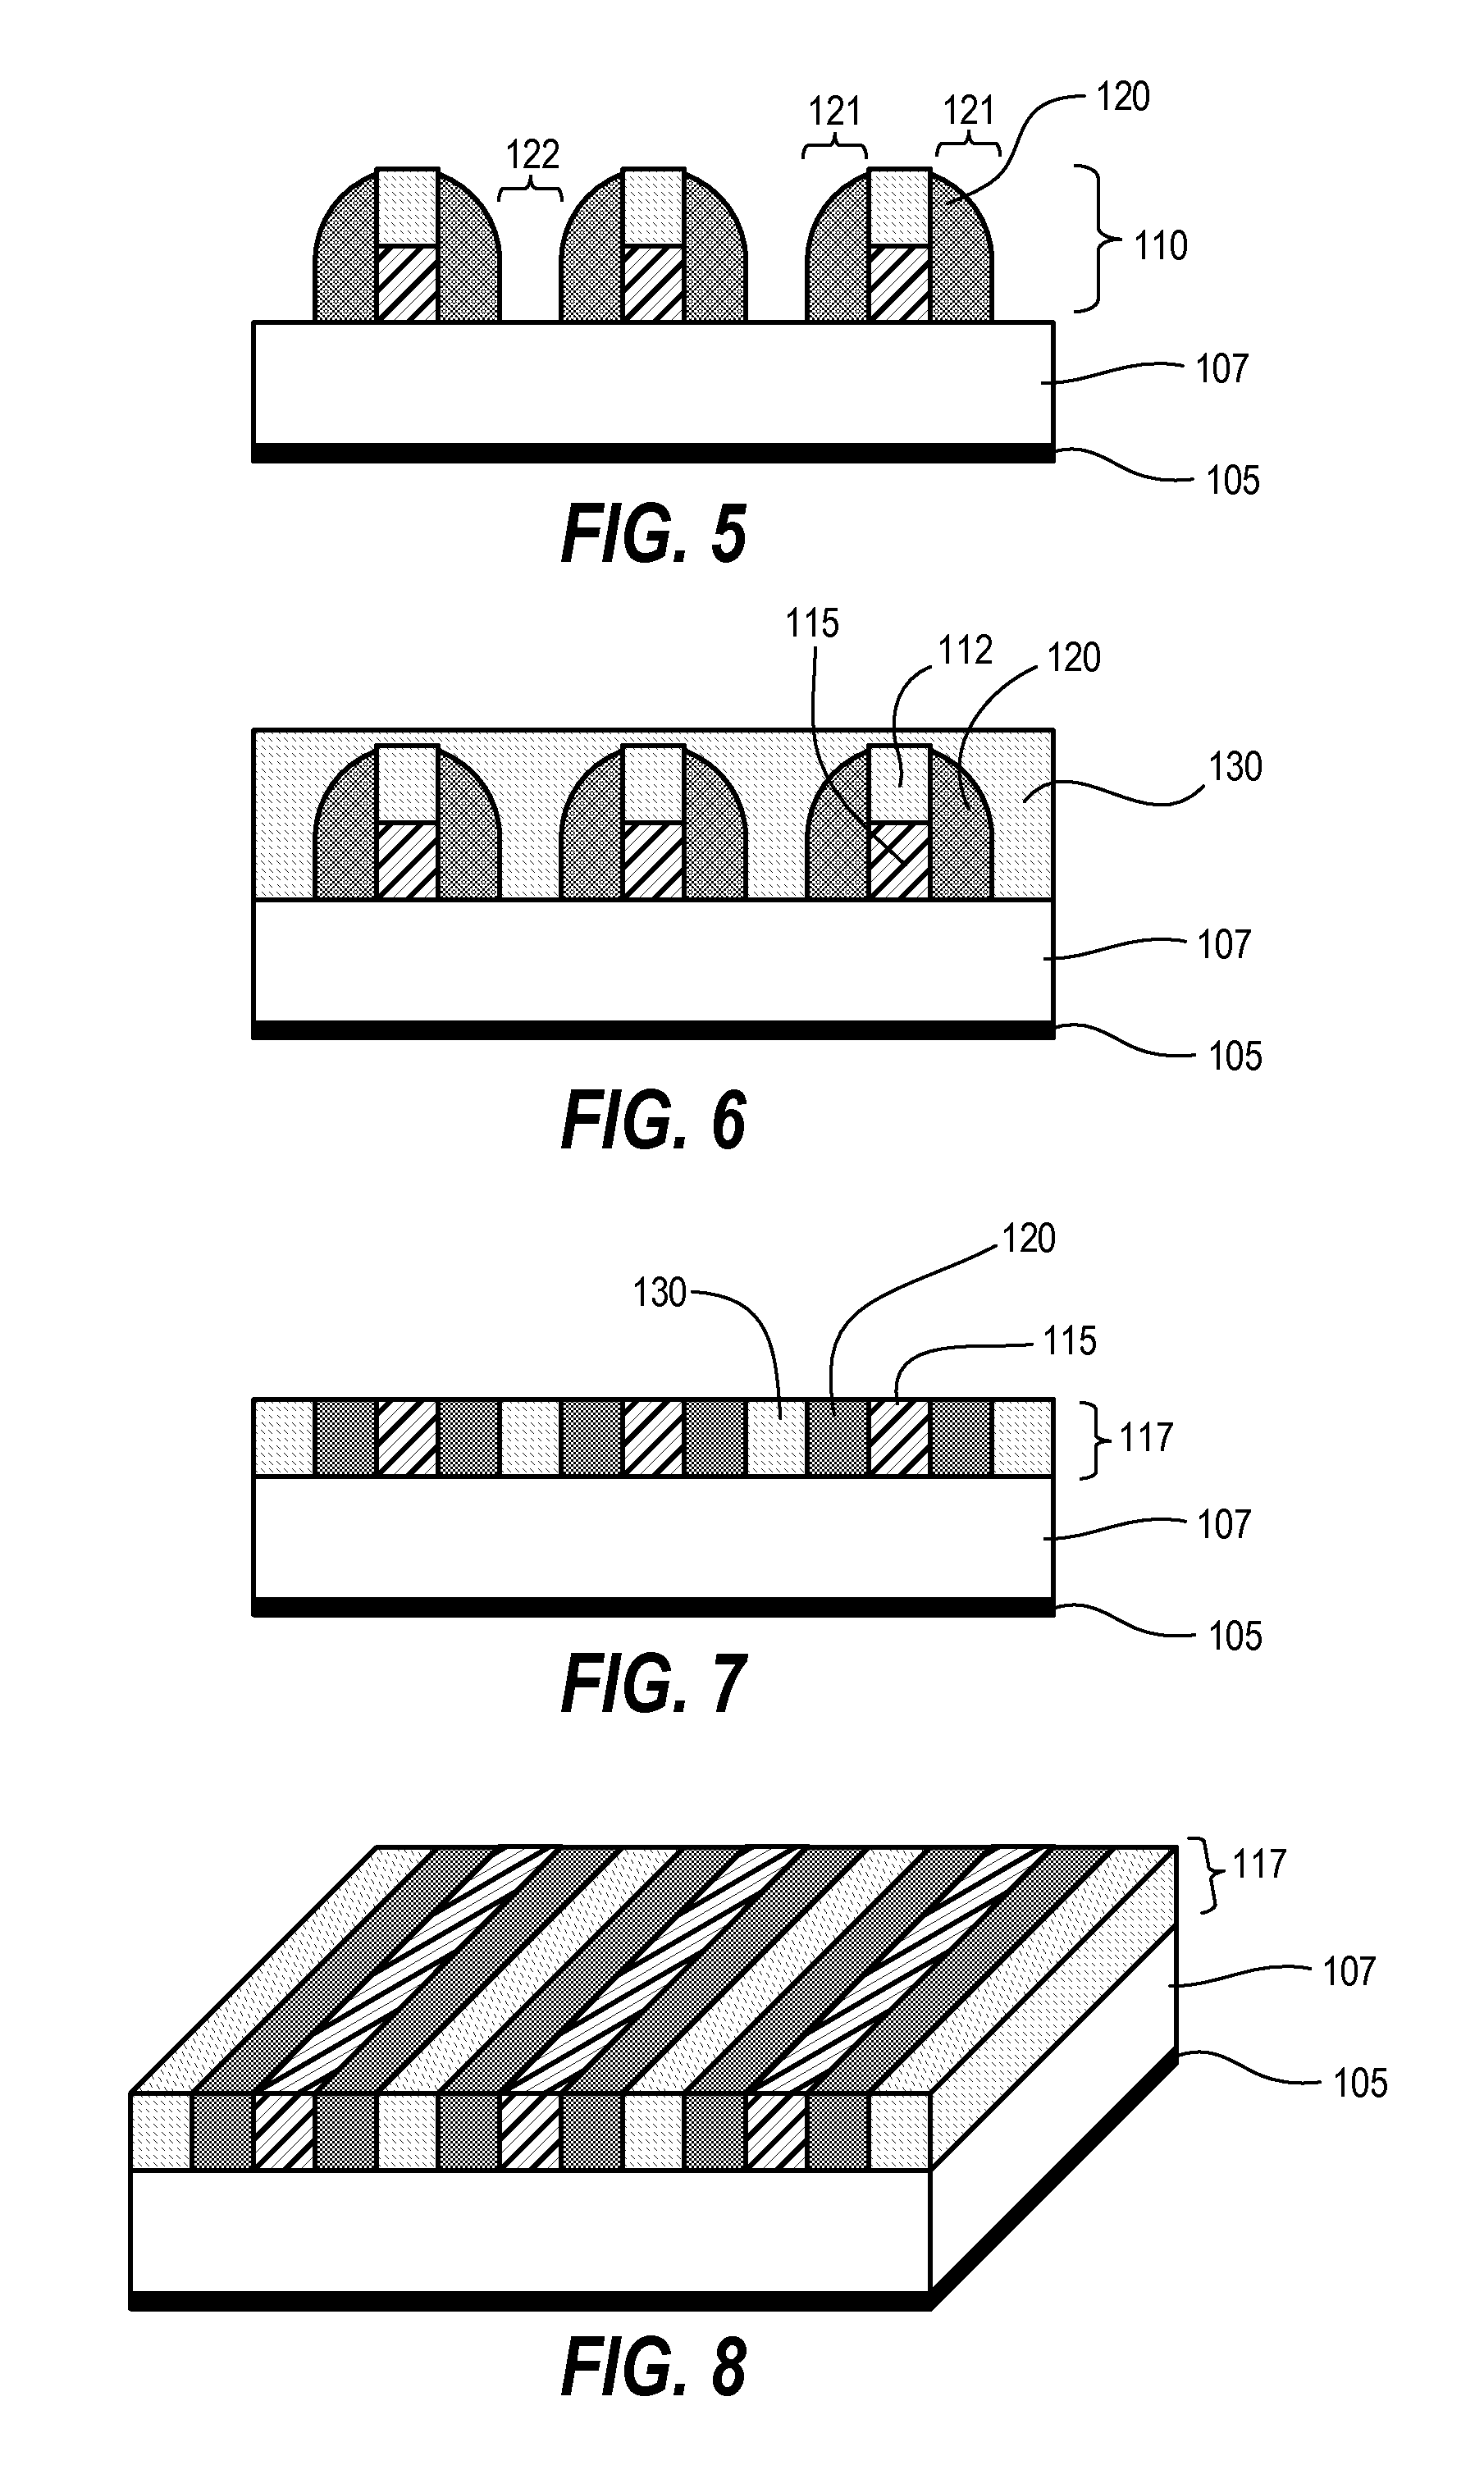 Method for Patterning a Substrate for Planarization